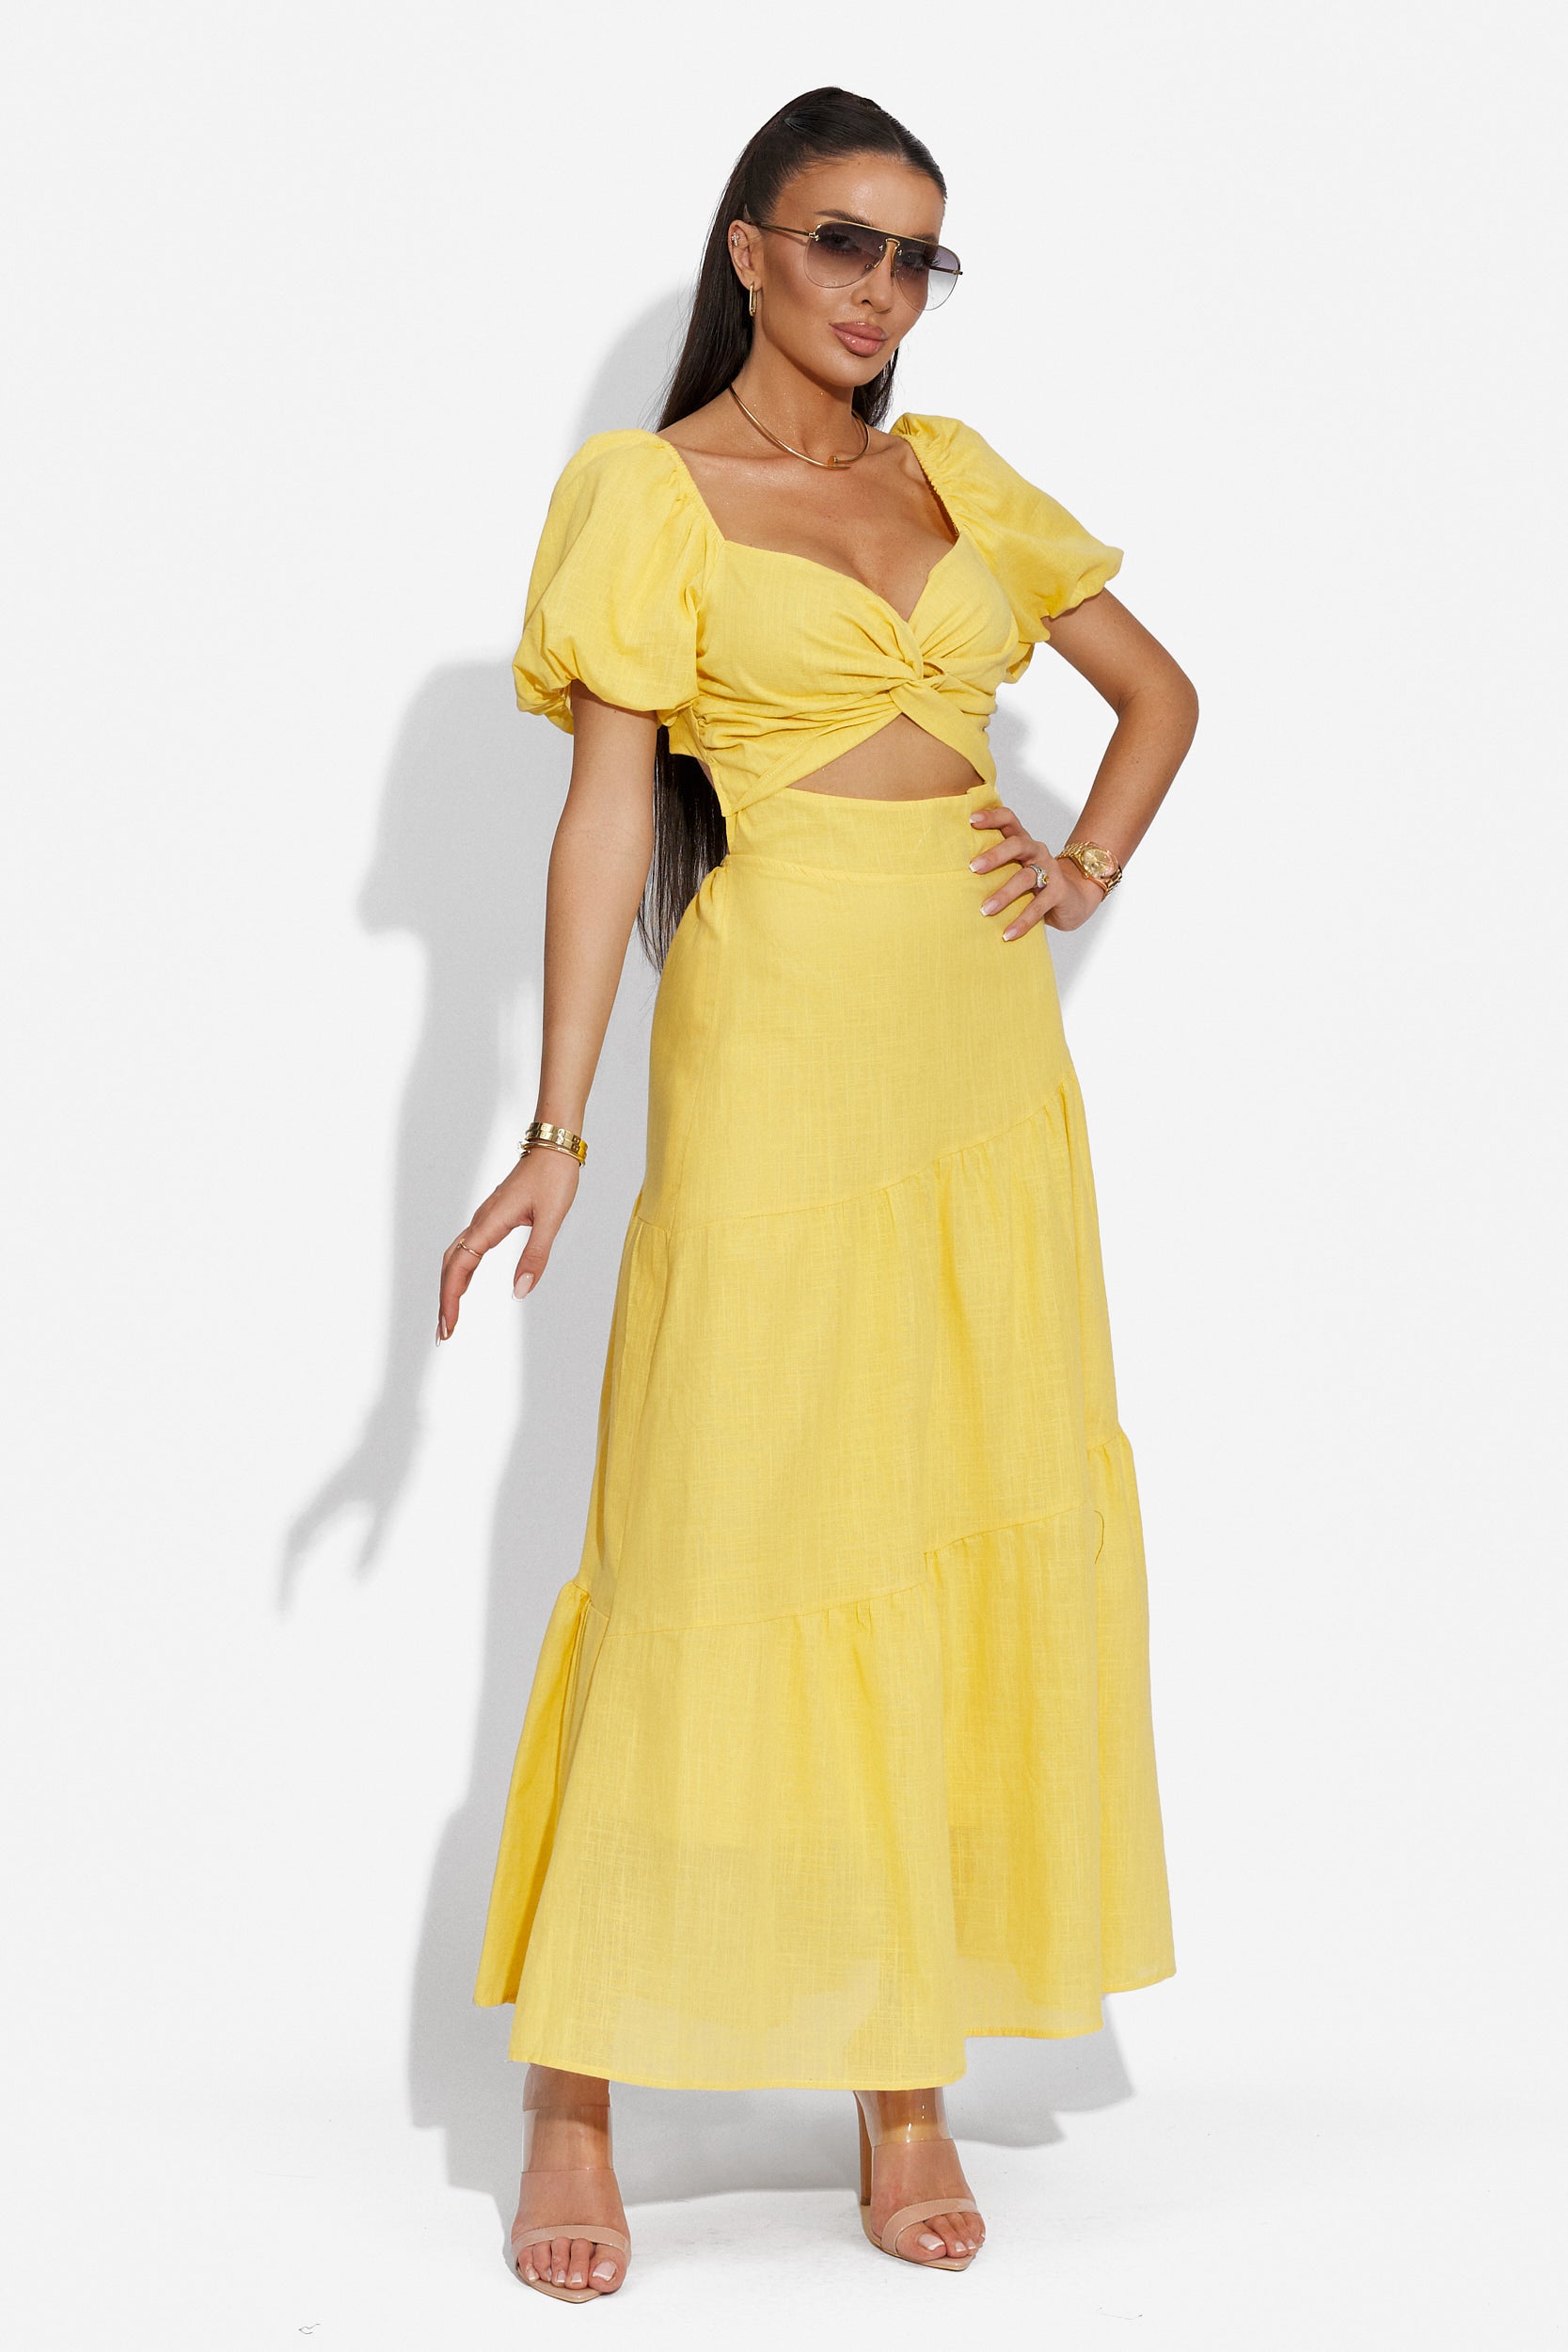 Mosysca Bogas yellow long dress for ladies